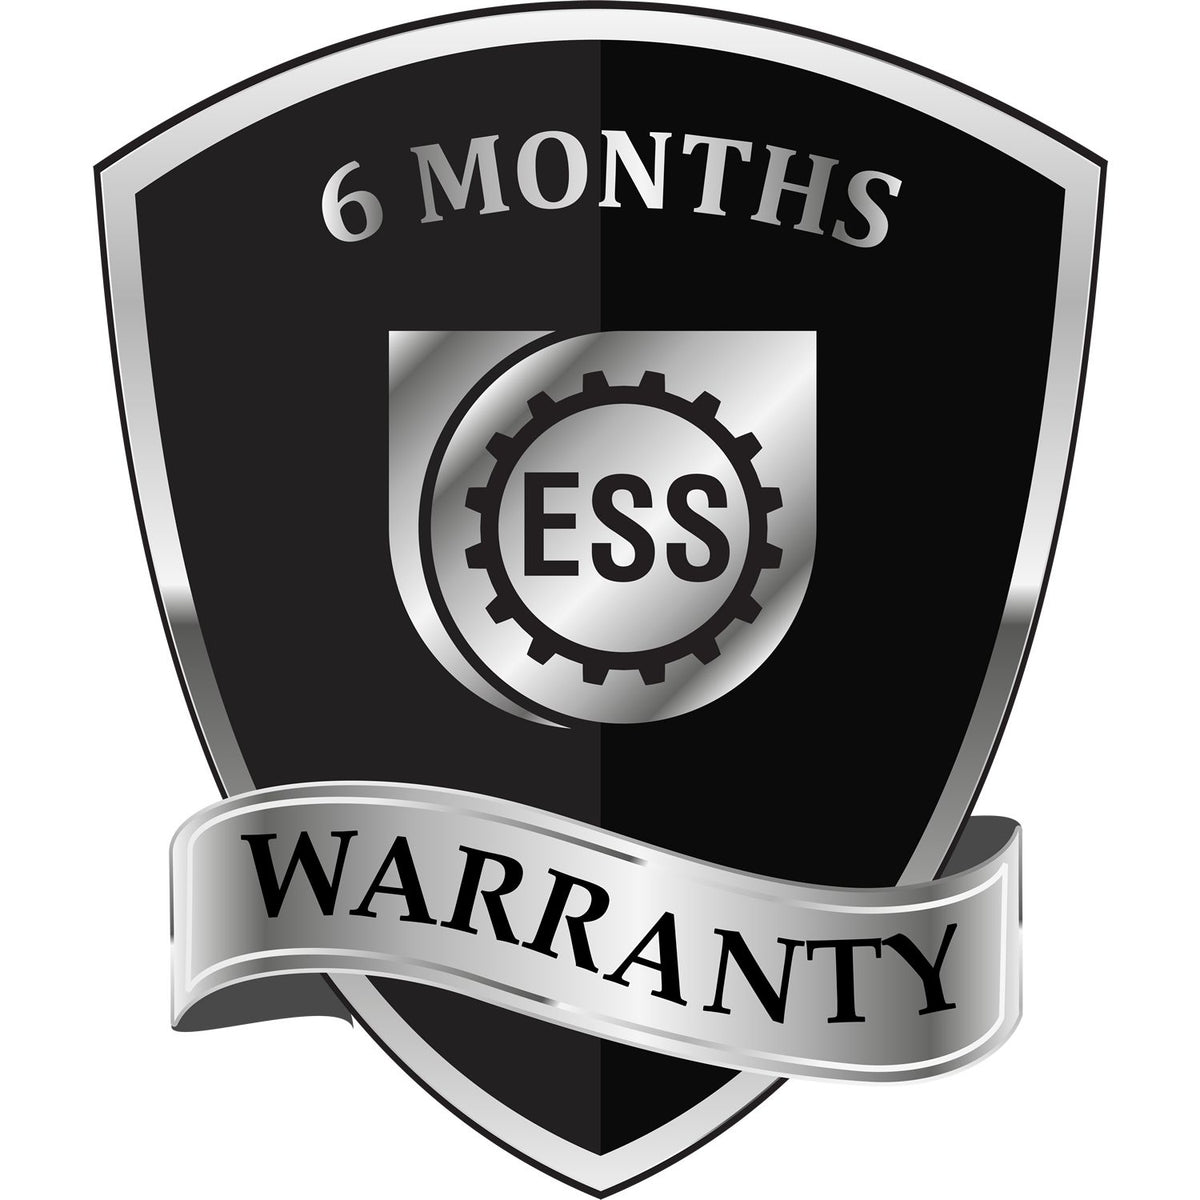 A badge or emblem showing a warranty icon for the Slim Pre-Inked Montana Professional Engineer Seal Stamp